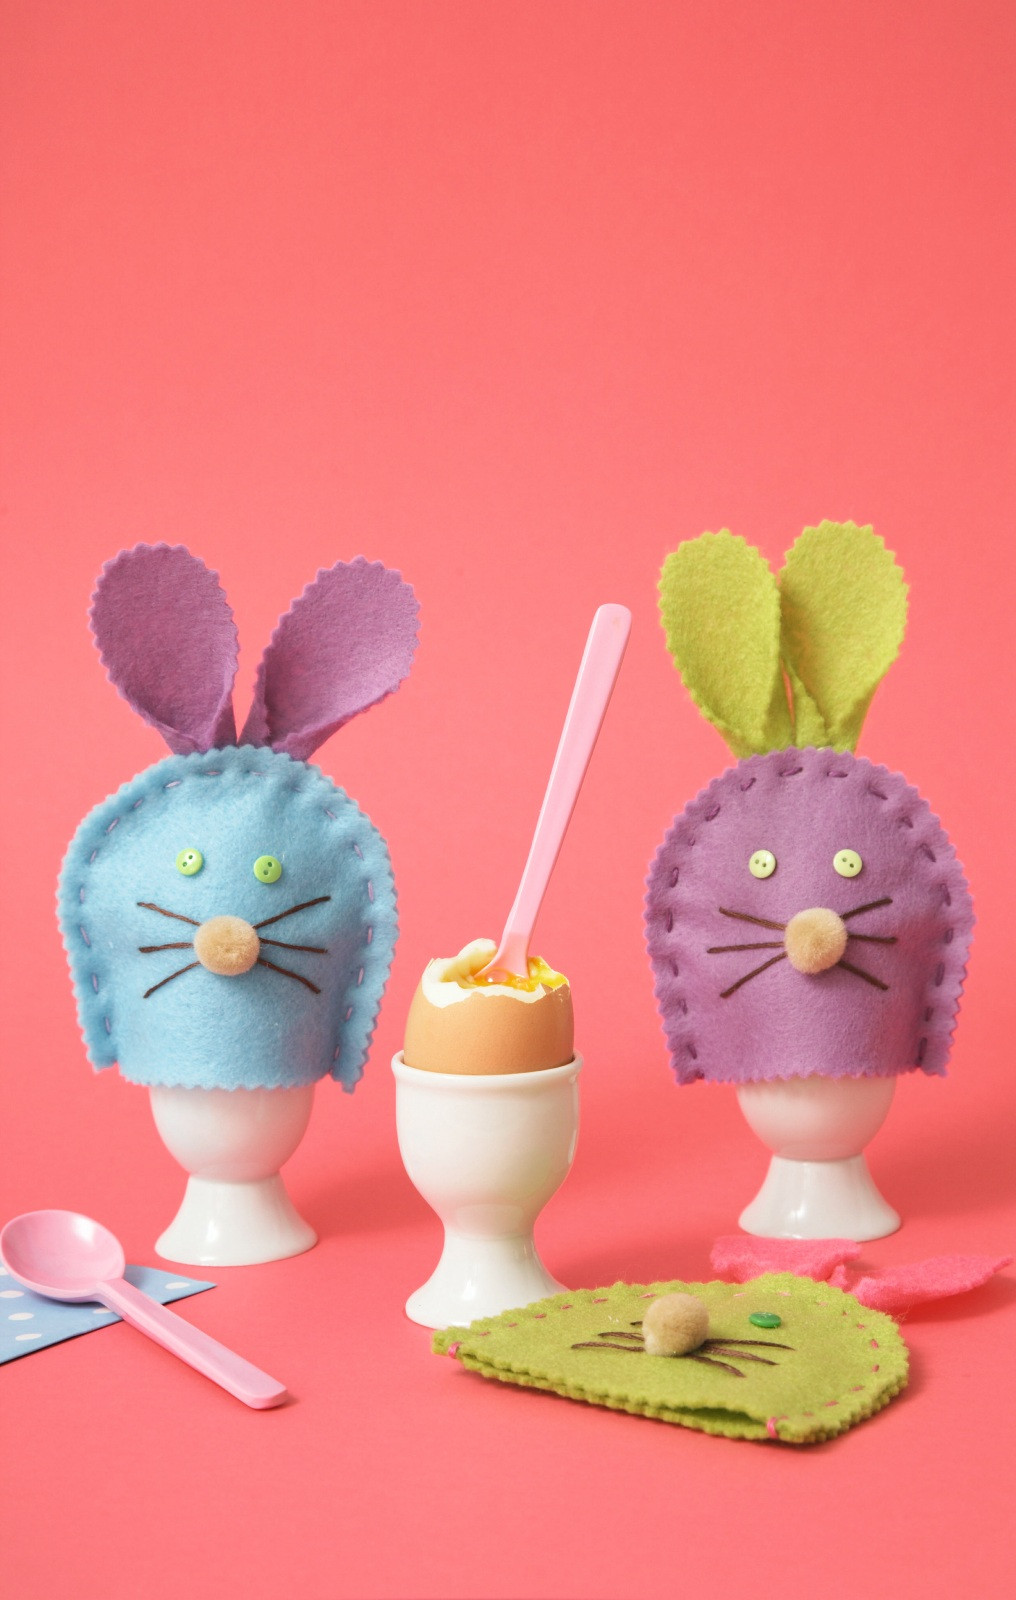 Toddlers Easter Craft Ideas
 9 Easy Easter Craft Ideas for Kids Hobbycraft Blog